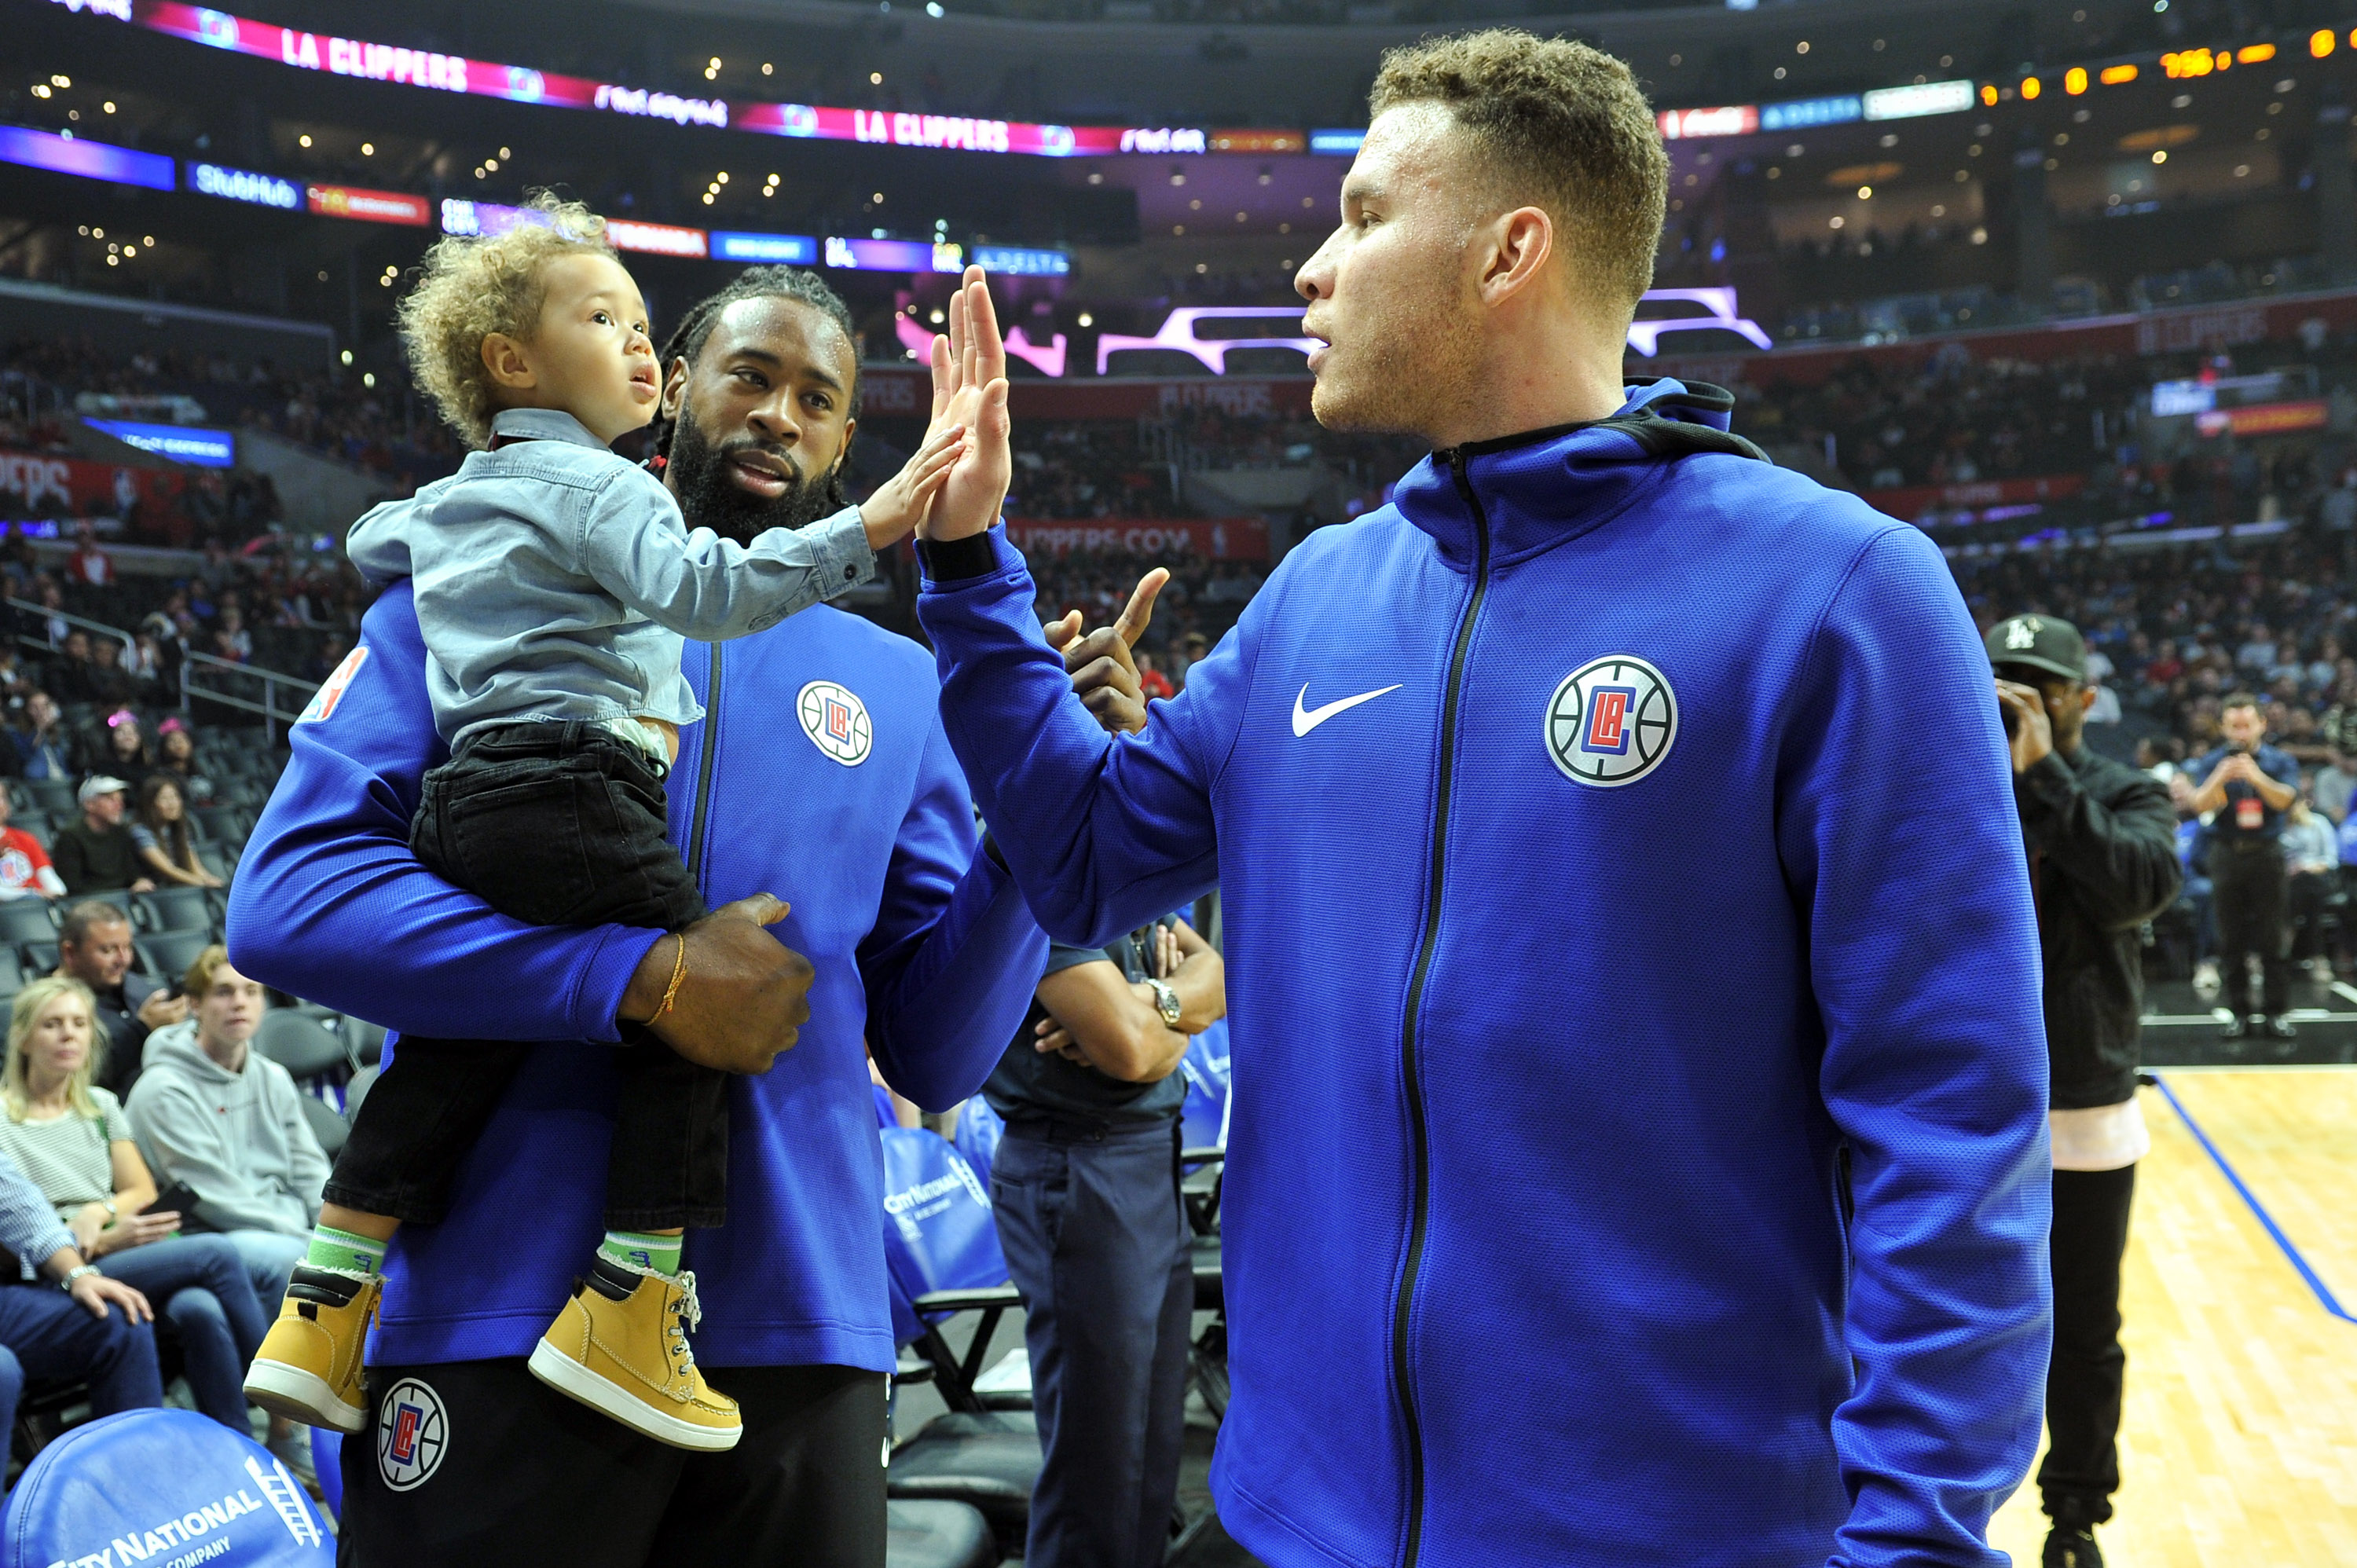 Does Blake Griffin Actually Have to Pay Almost $300,000 a Month in Child Support?